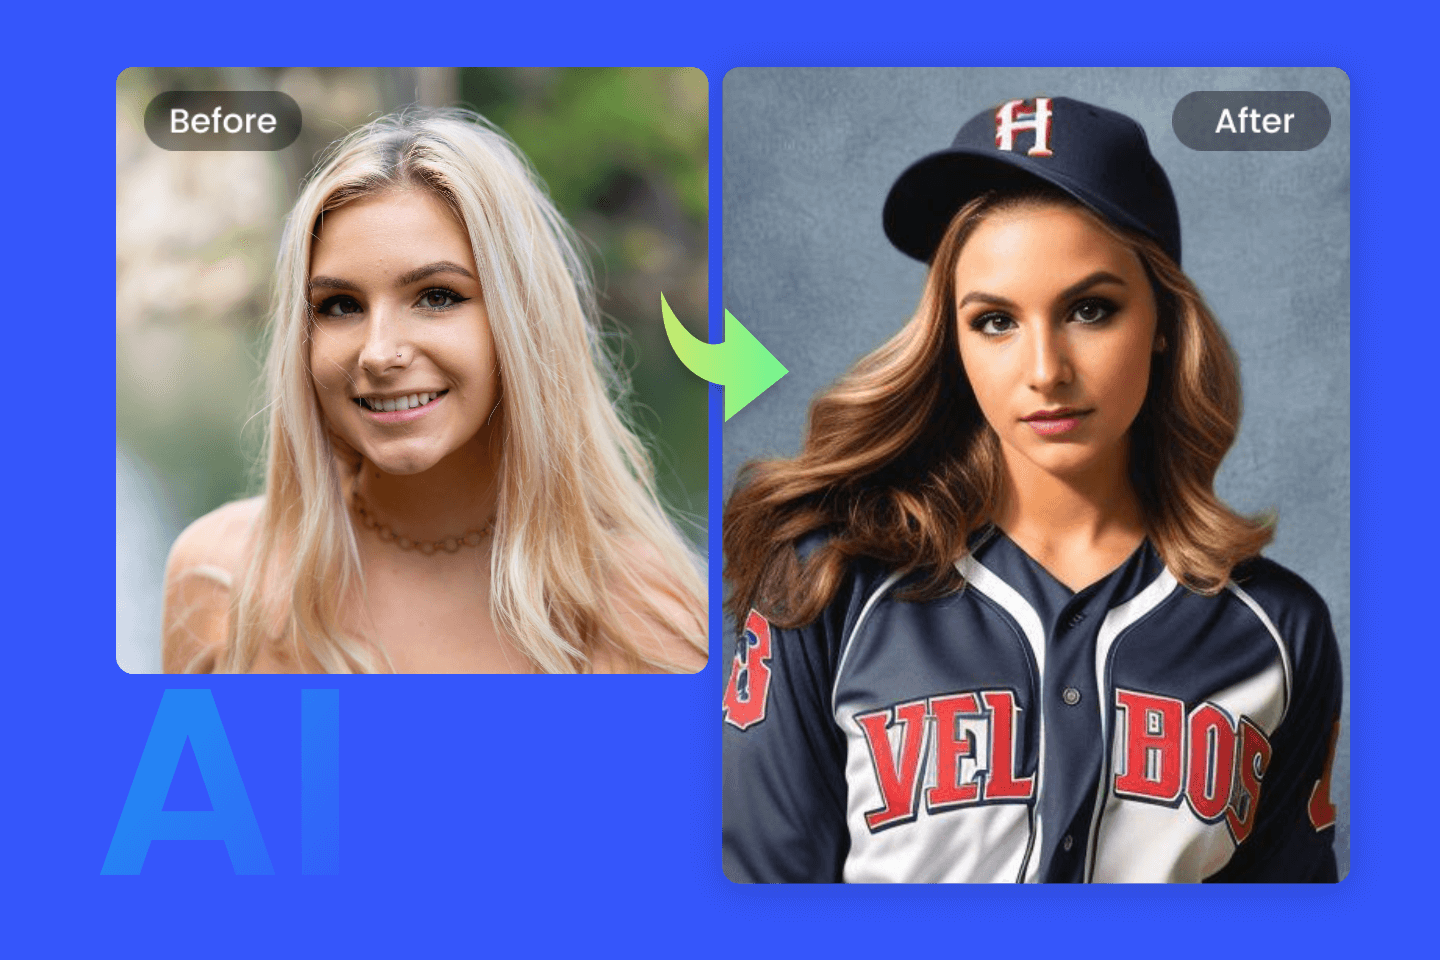 Apply the ai yearbook filter to make an ai yearbook photo in fotor